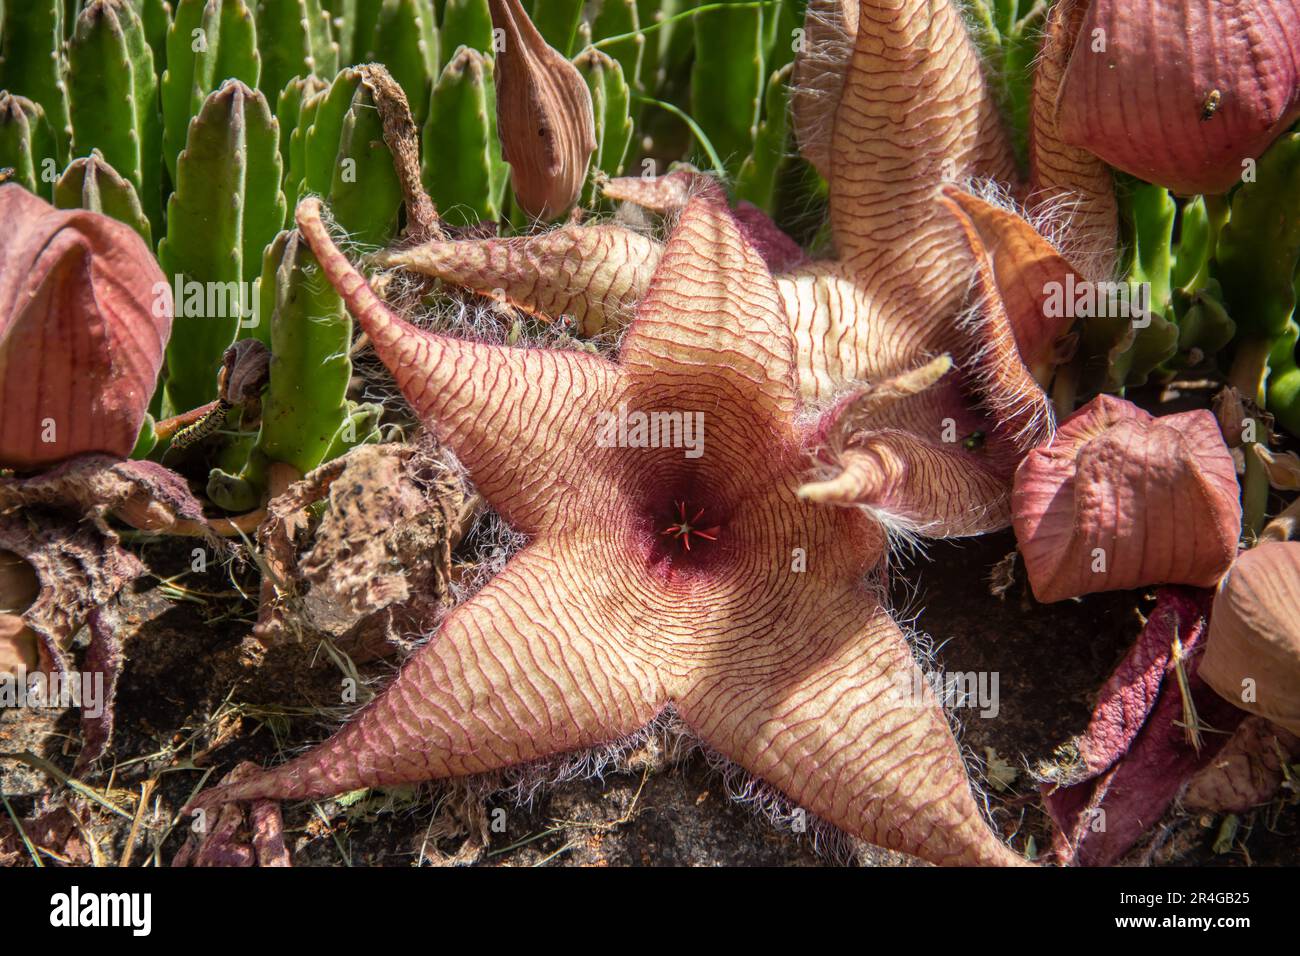 Stapelia gigantea is a species of flowering plant in the genus Stapelia of the family Apocynaceae. Common names include Zulu giant and carrion Stock Photo